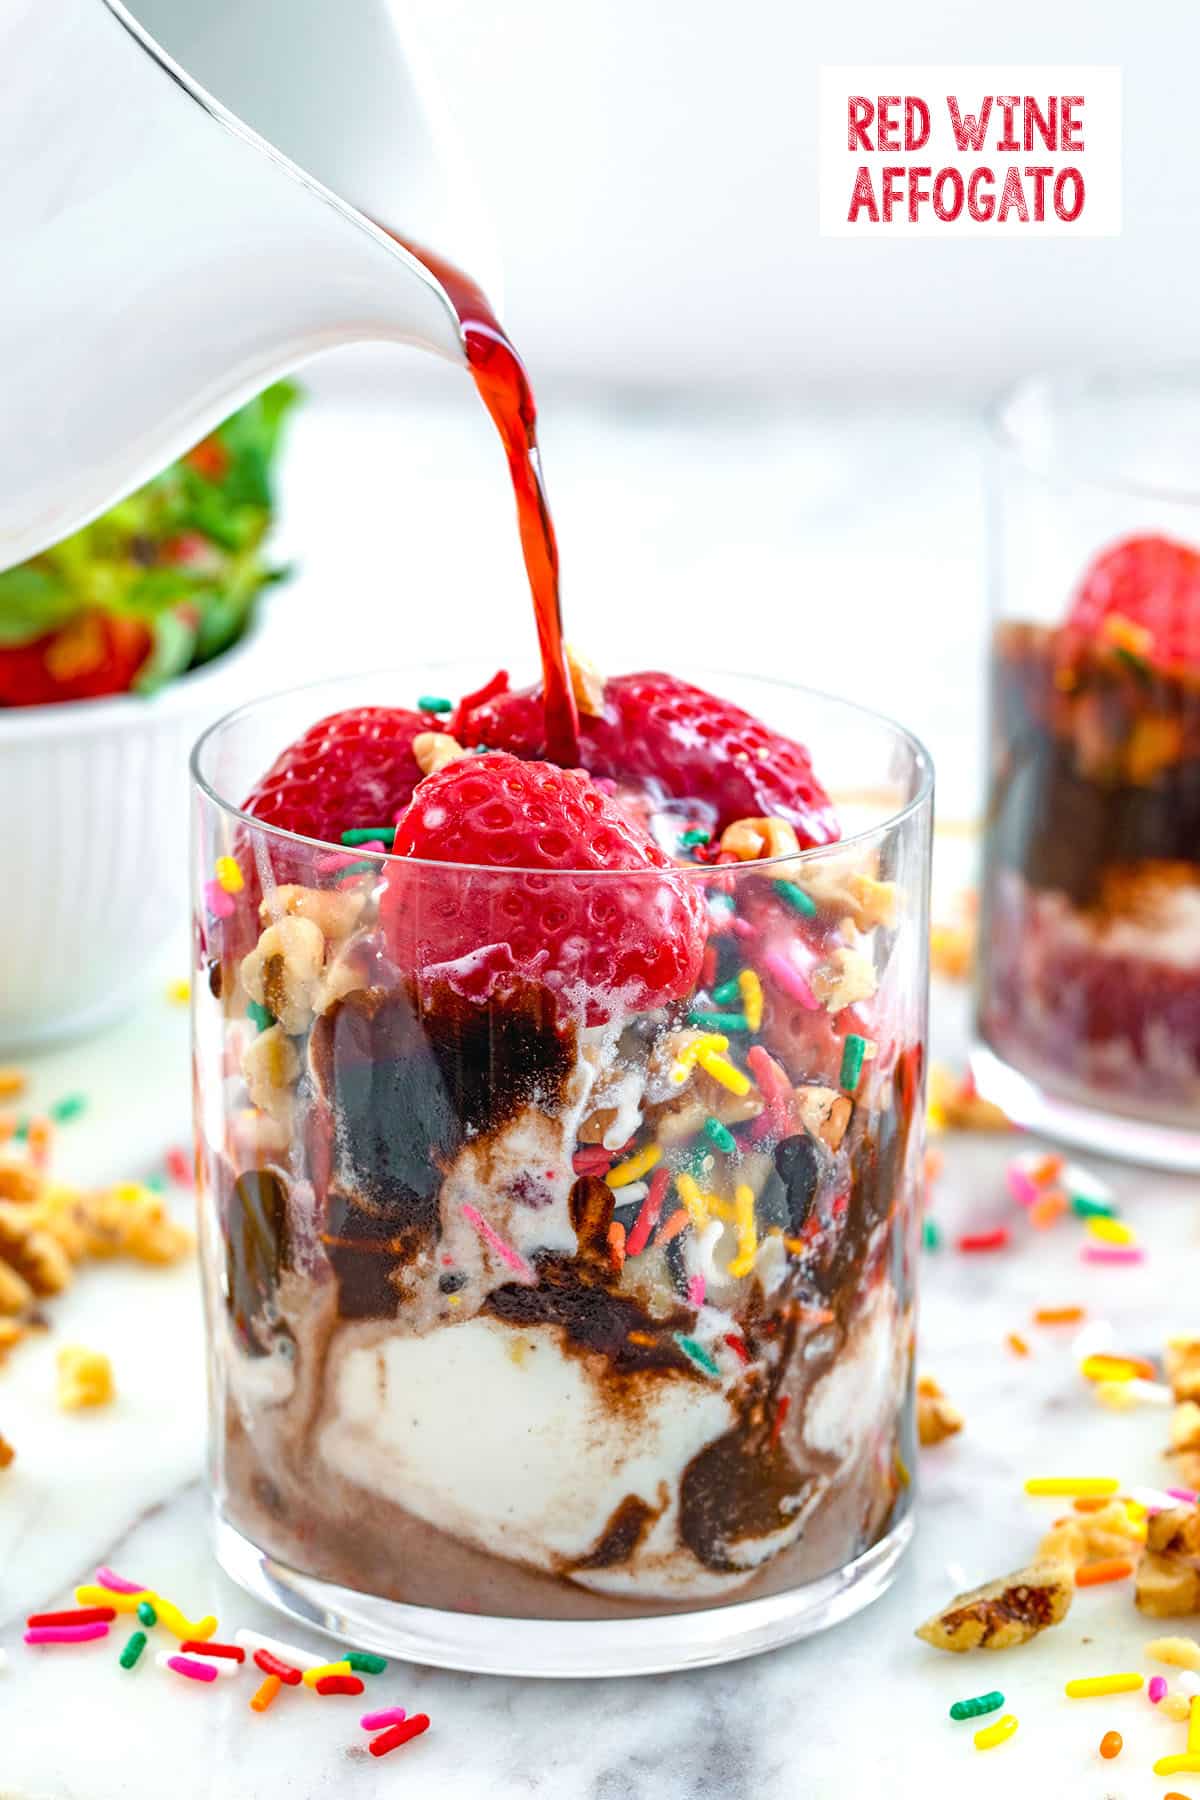 Head-on view of a glass of vanilla ice cream with chocolate, strawberries, walnuts, and sprinkles with red wine being poured over it for a red wine affogato with recipe title at top of image.